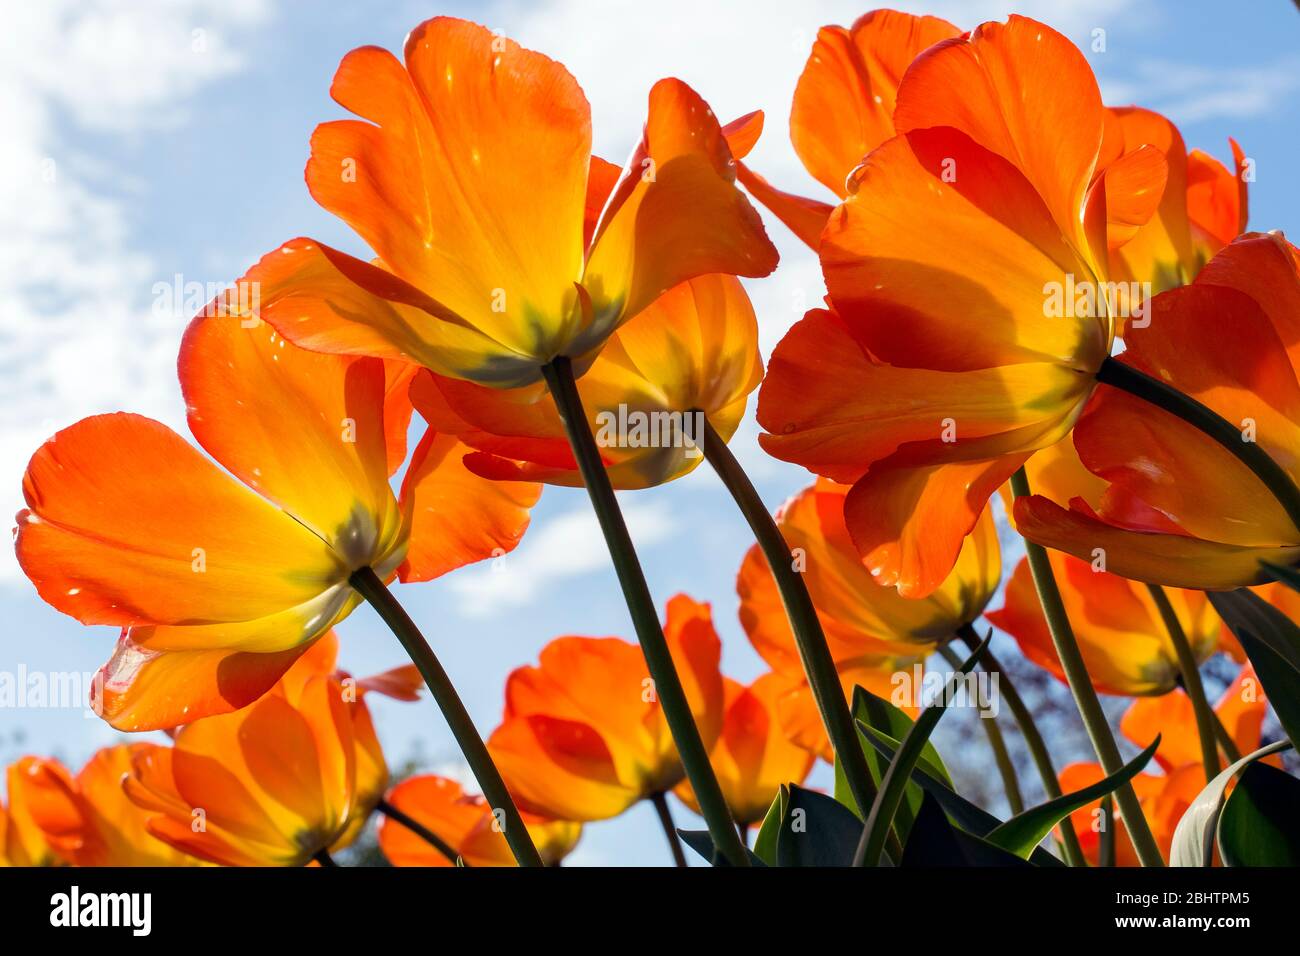 Low point of view photo of red and yellow tulips isolated against blue skies Stock Photo